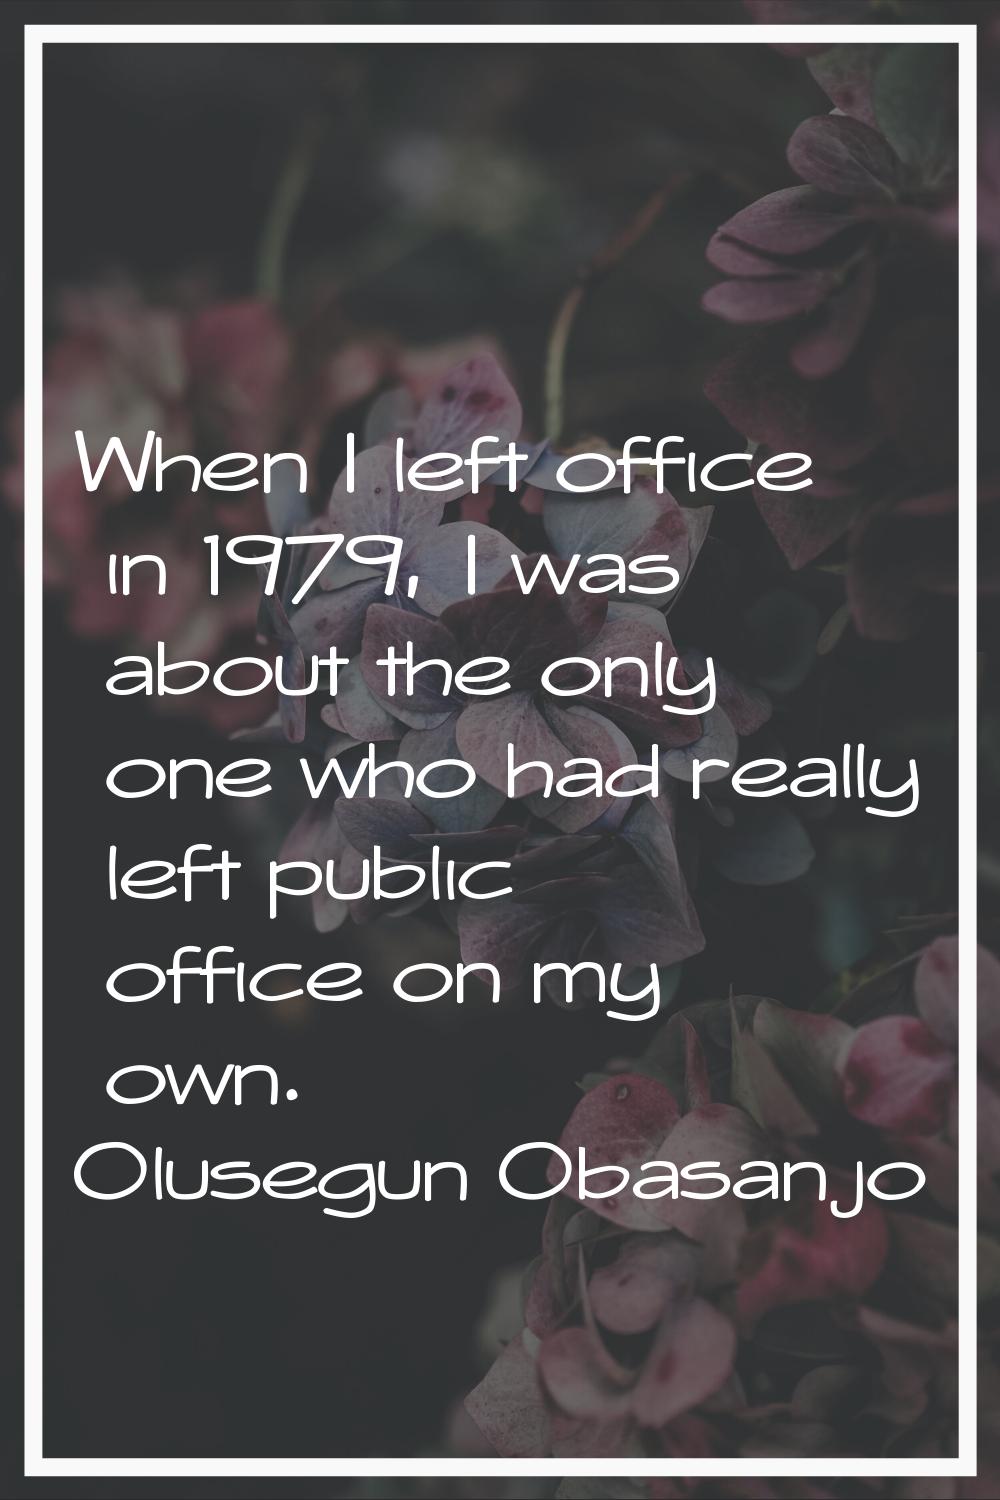 When I left office in 1979, I was about the only one who had really left public office on my own.